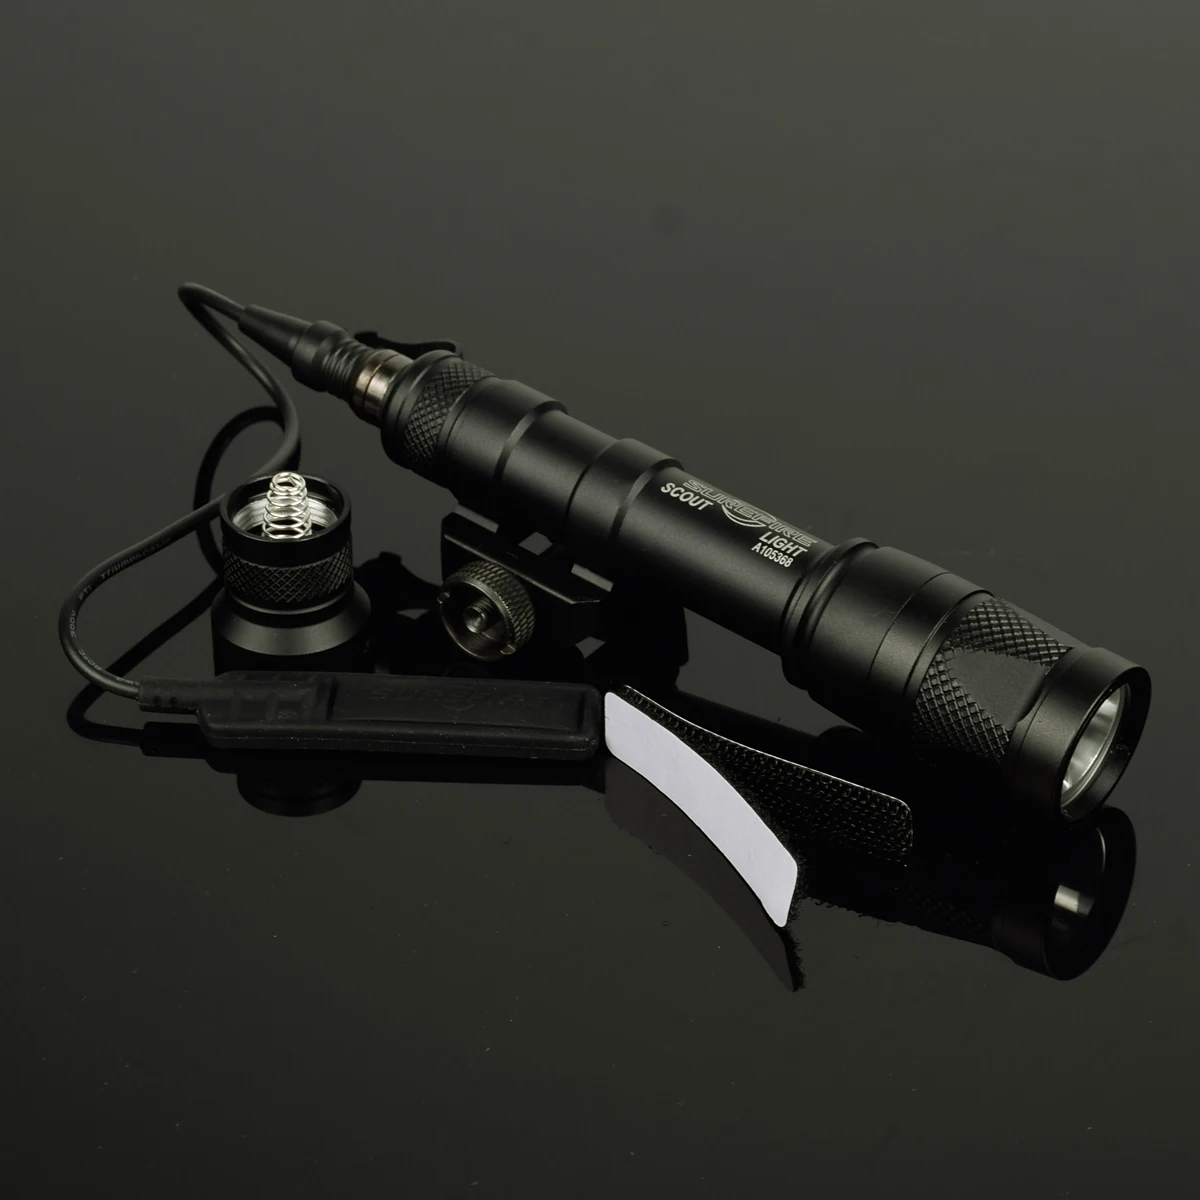 

Tactical Surefire M600 M600V Scout Light Hunting Strobe Flashlight Torch Gun Weapon Lantrena For Picatinny Rail with Tape Switch